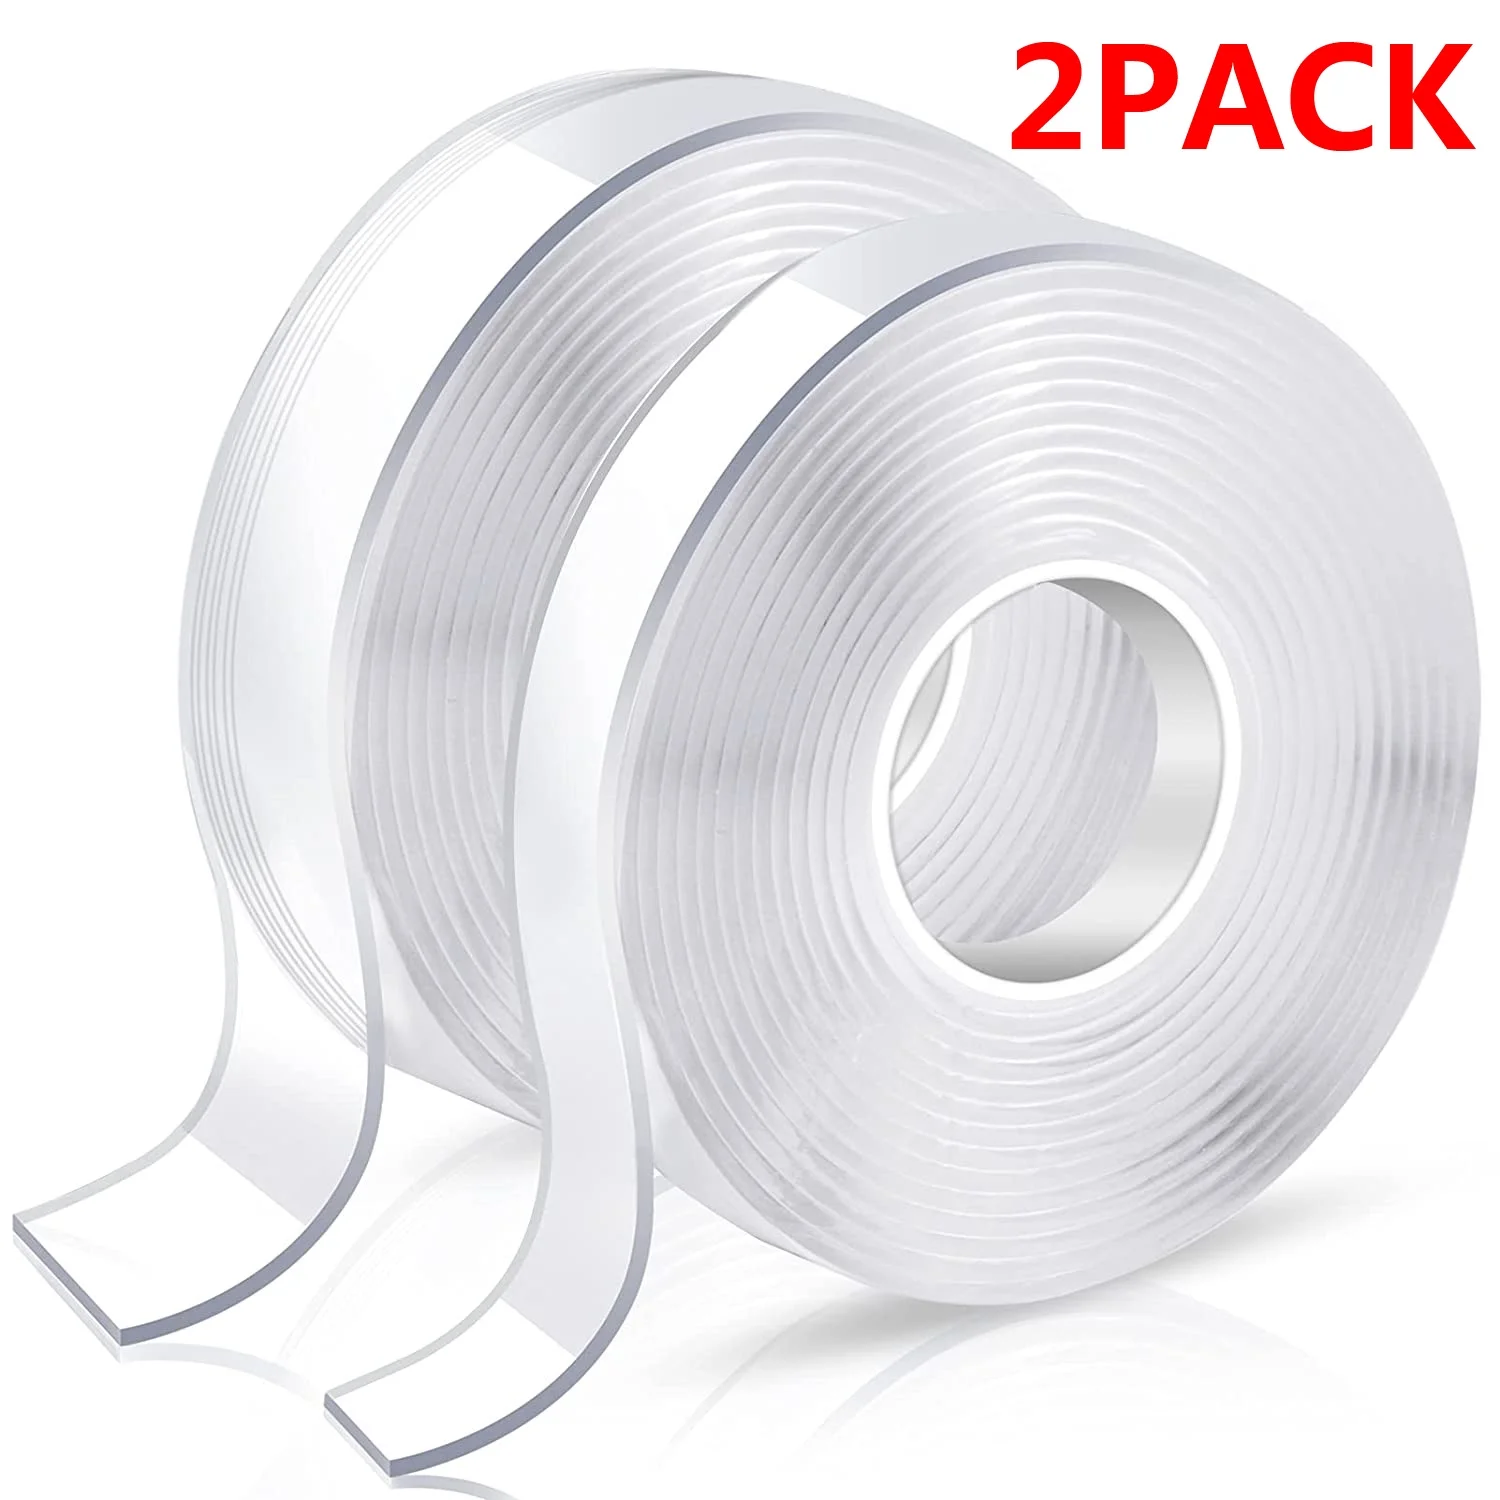 Double Sided Tape Heavy Duty 3M - Thickened to 1mm, Strong Sticky